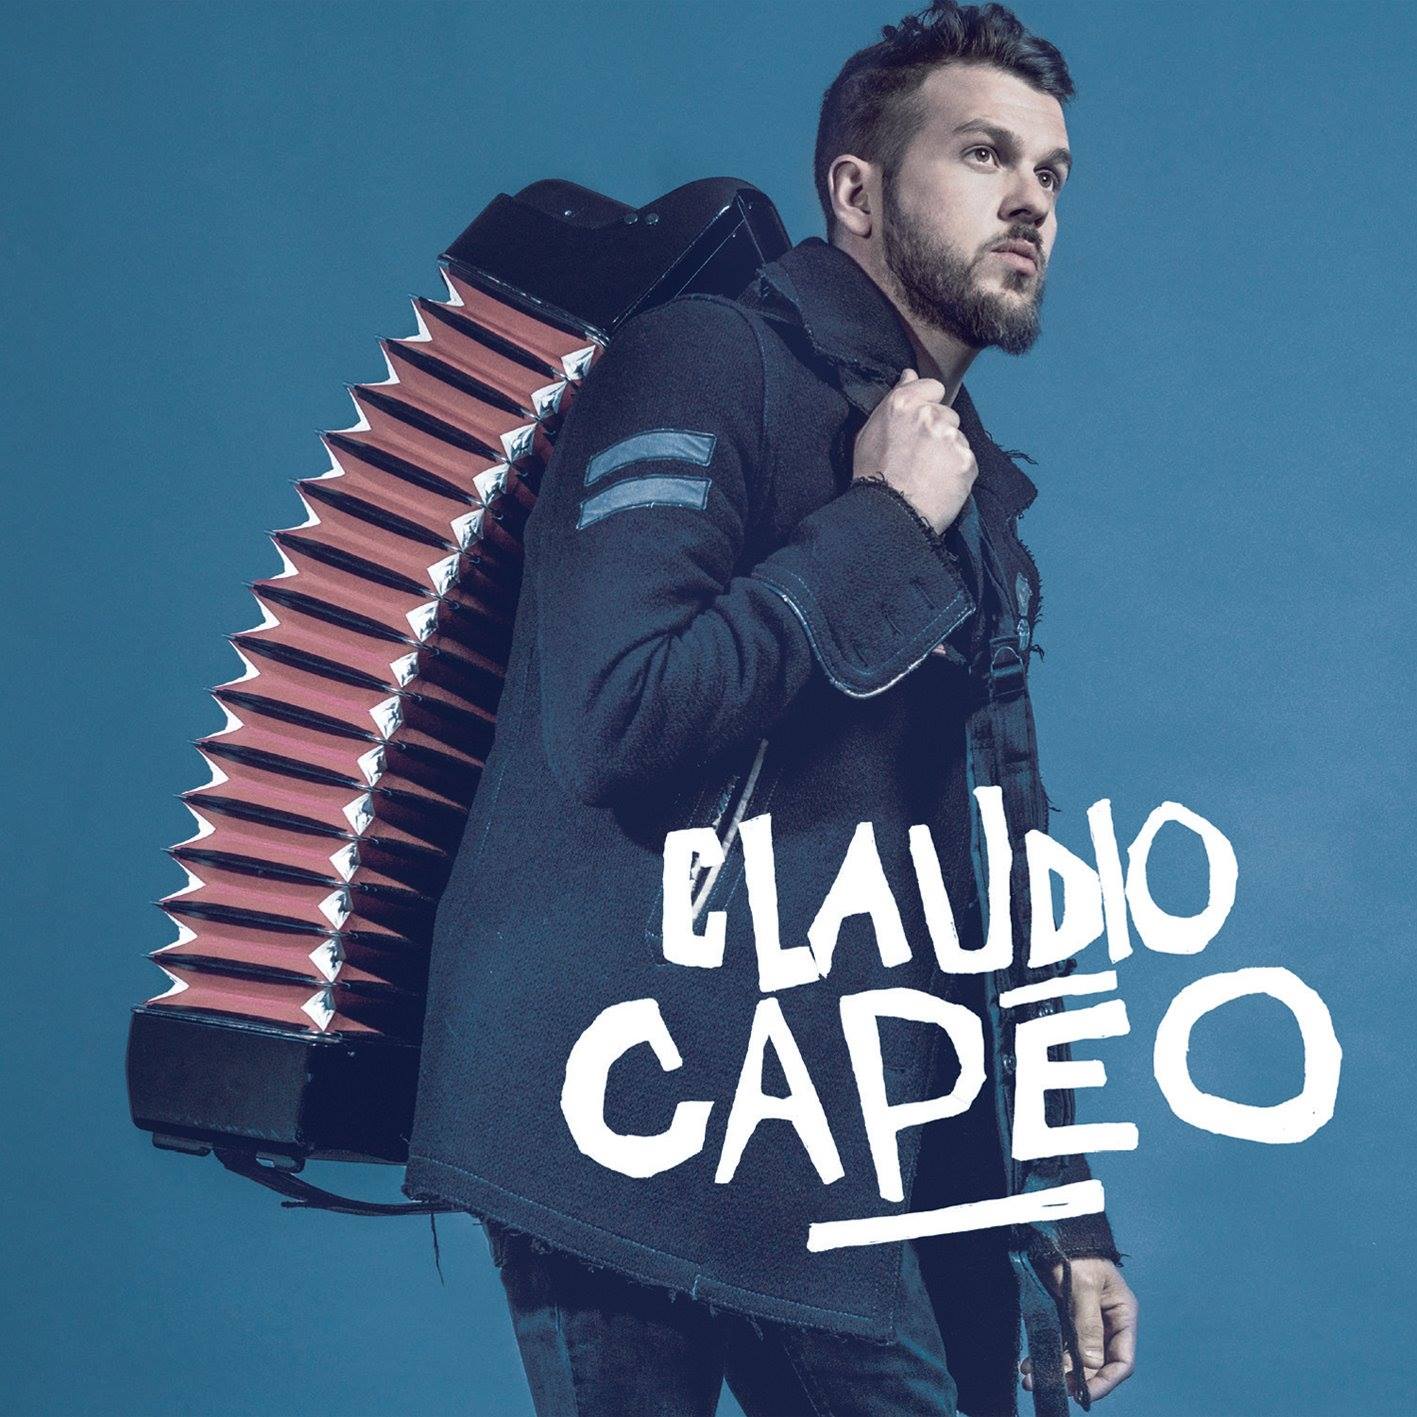 Claudio Capeo en Forest National Tickets